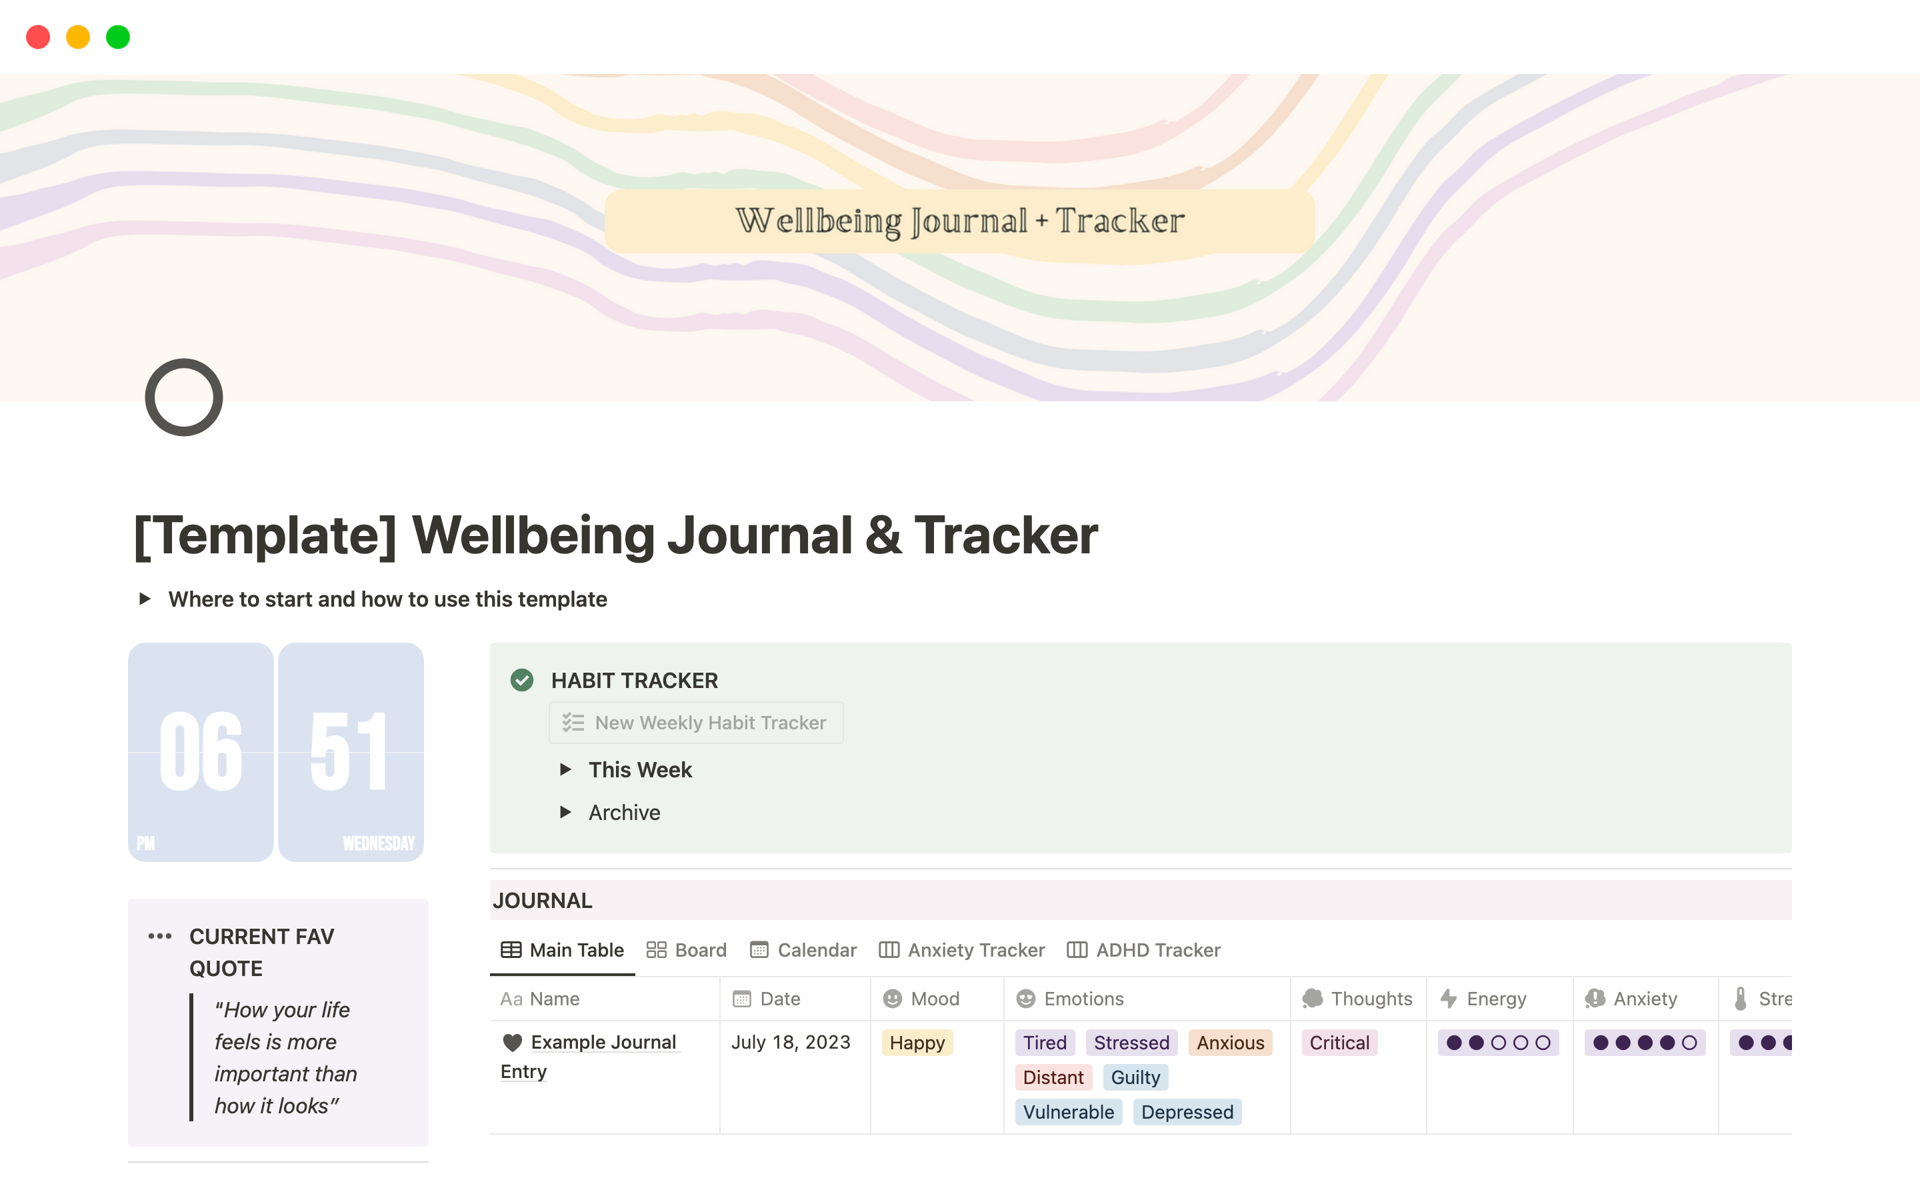 A template preview for Wellbeing Journal & Tracker ADHD + Anxiety Tracker